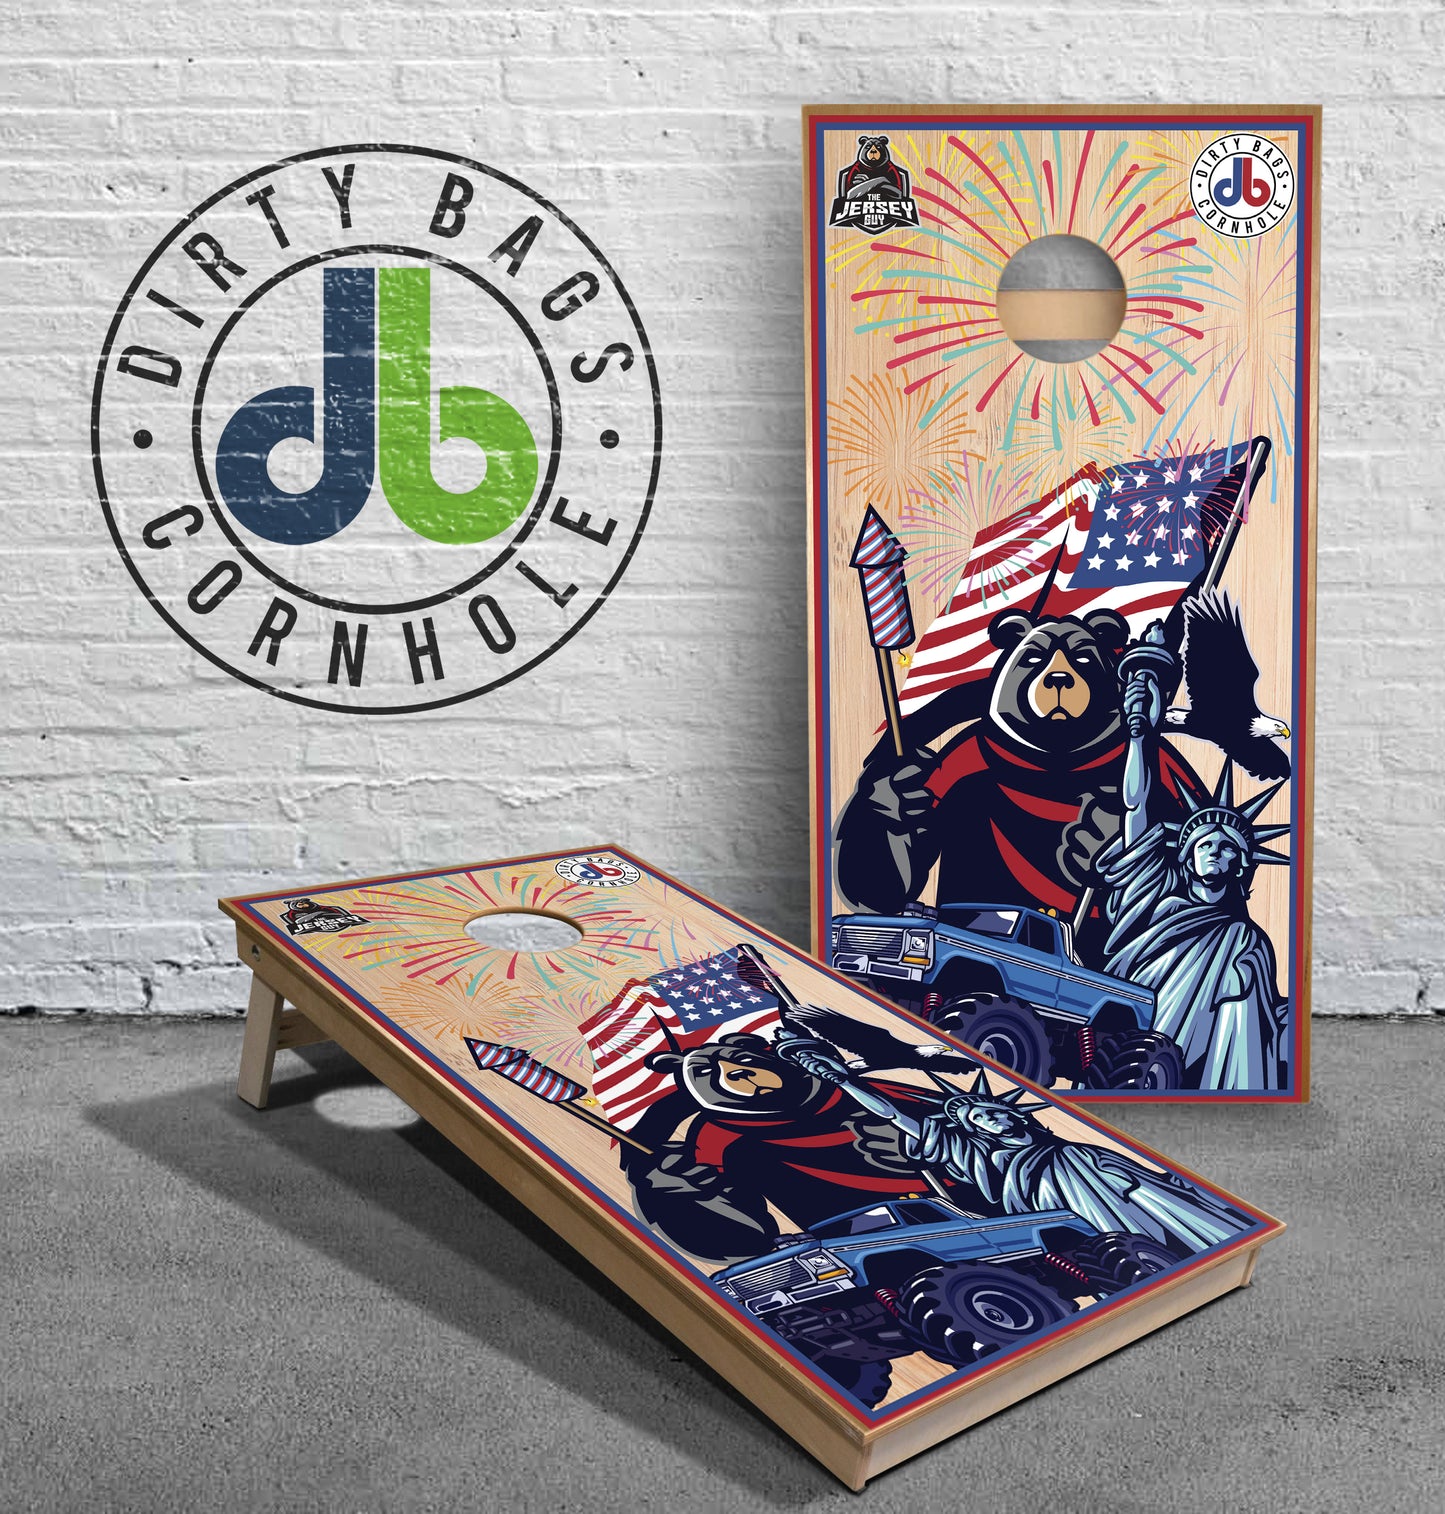 Jersey Guy - Special Edition "America Bear" Boards